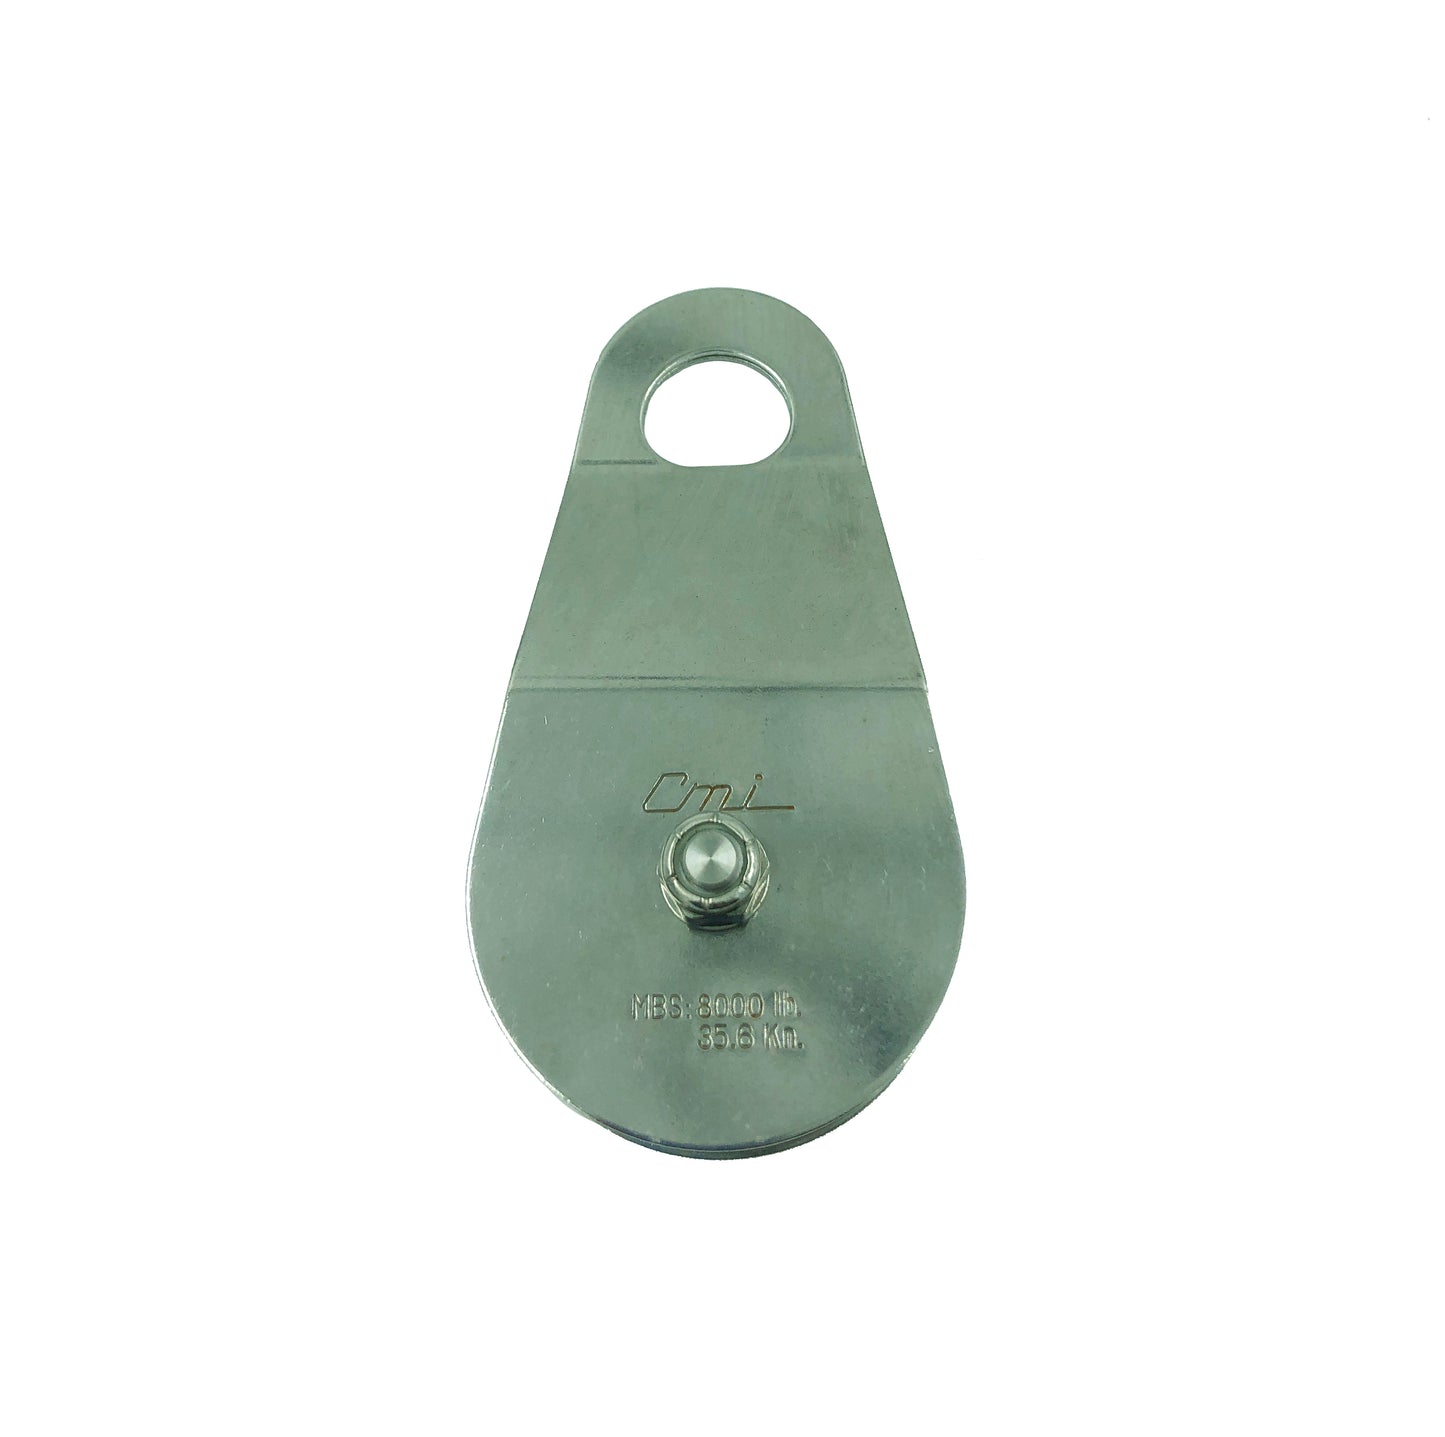 CMI 2" NFPA Compliant Service Line Bushing Pulley (RP118NFPA)